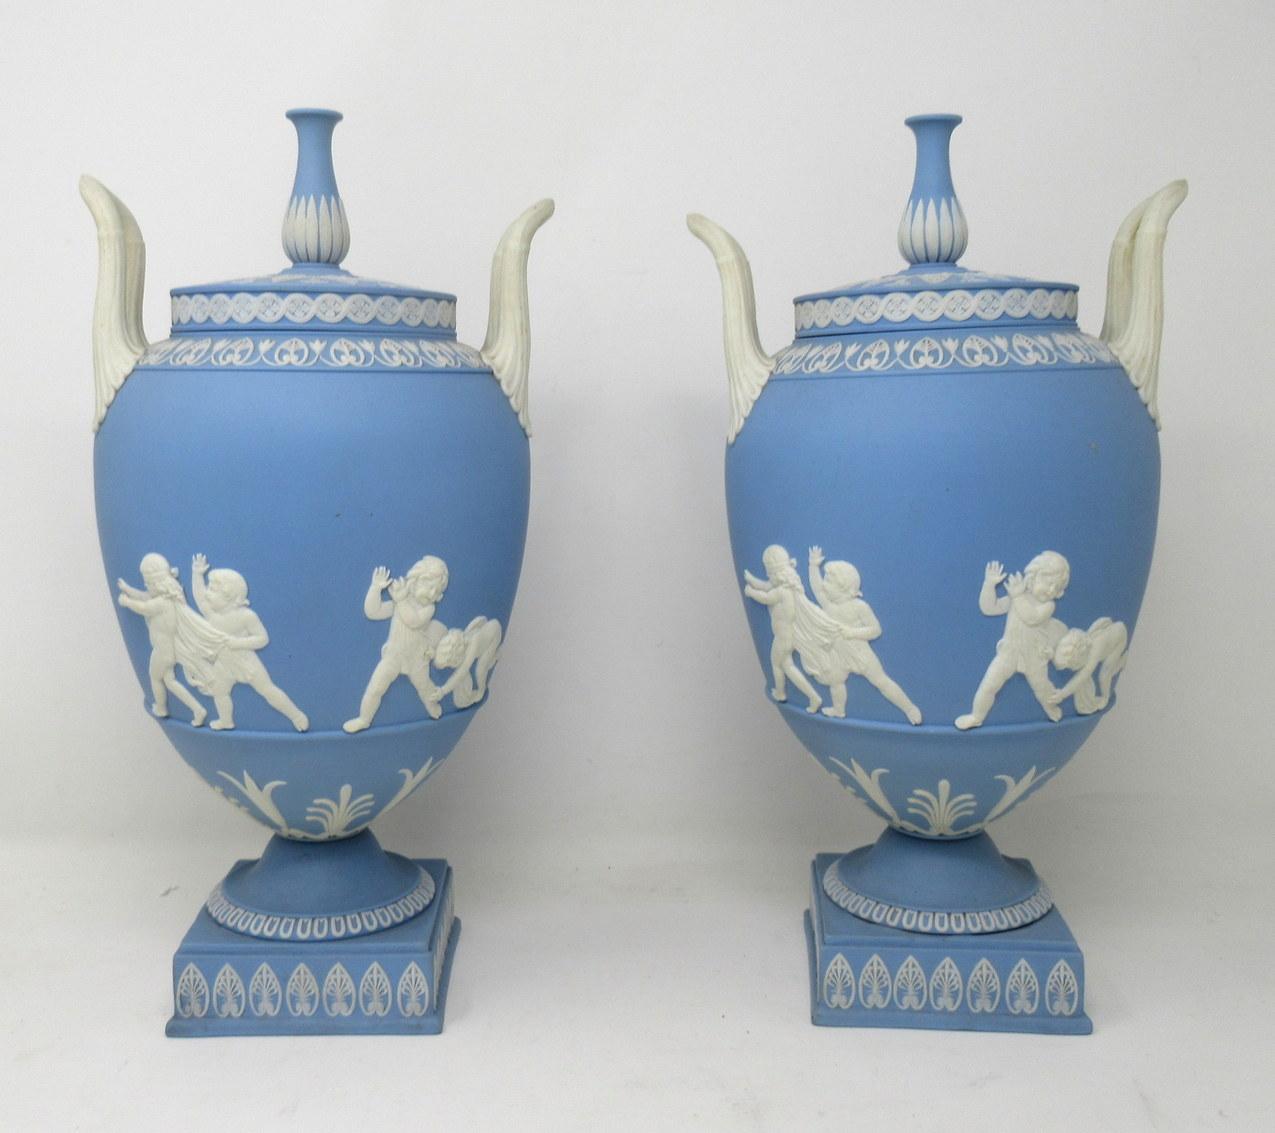 An exquisite and quite rare pair English Staffordshire Wedgwood Jasperware blue ground vases of Amphora outline and generous proportions, firmly attributed to John Flaxman Junior. Circa first quarter of the 19th century, possibly a little earlier.